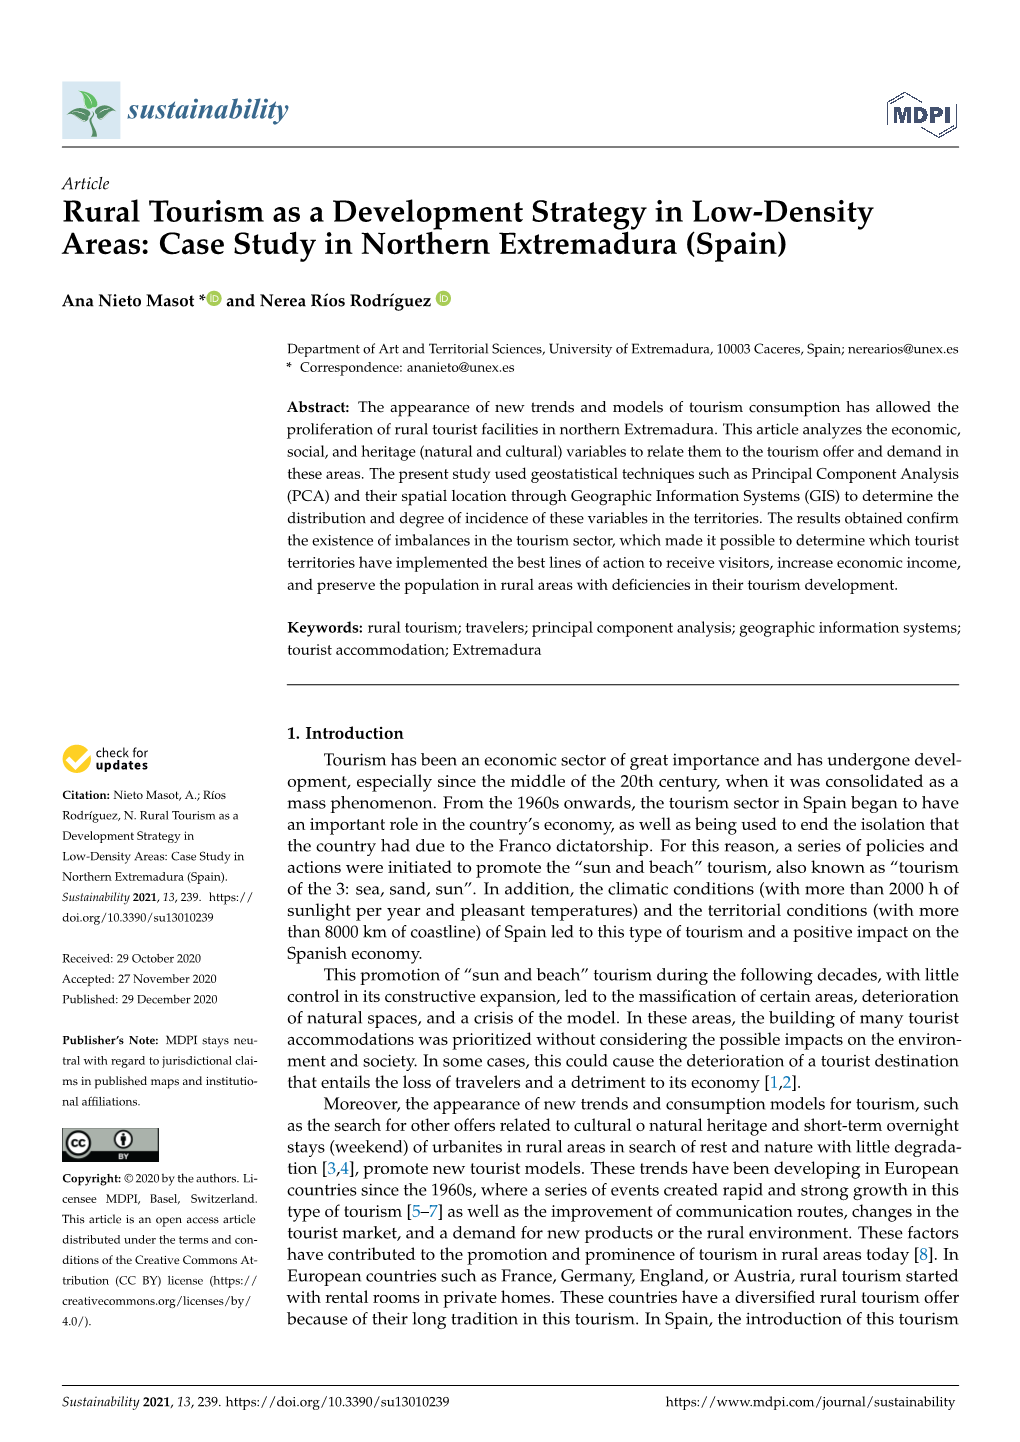 Rural Tourism As a Development Strategy in Low-Density Areas: Case Study in Northern Extremadura (Spain)